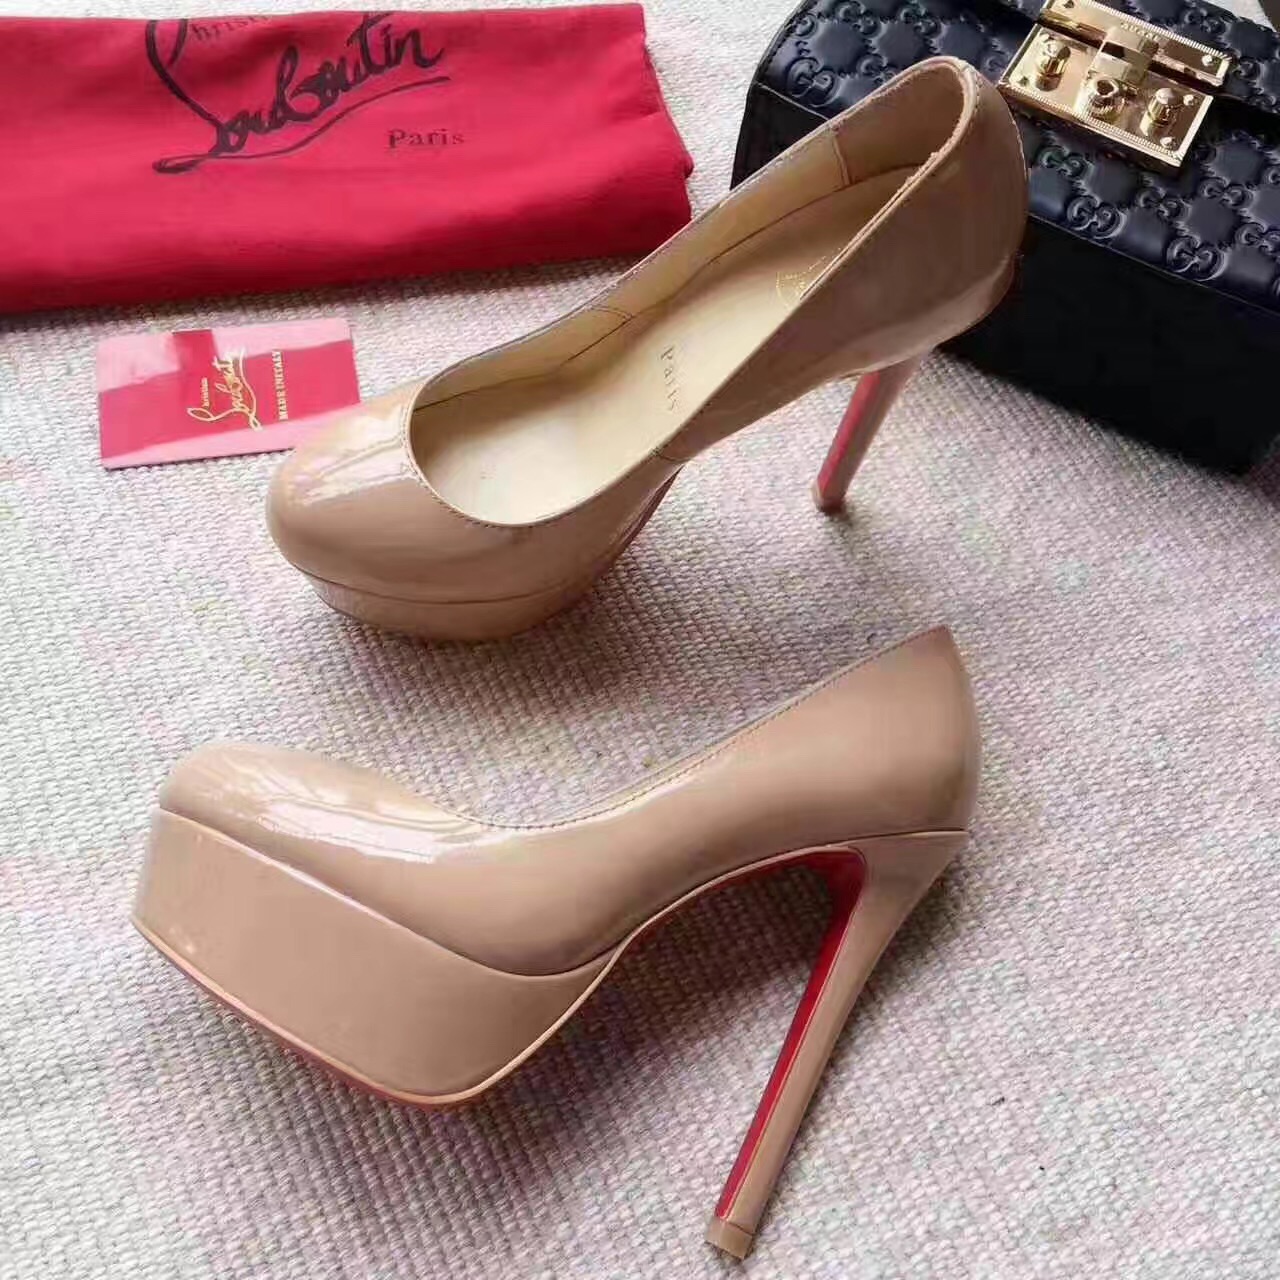 Christian Louboutin 13cm nude heels sandals red soled shoes